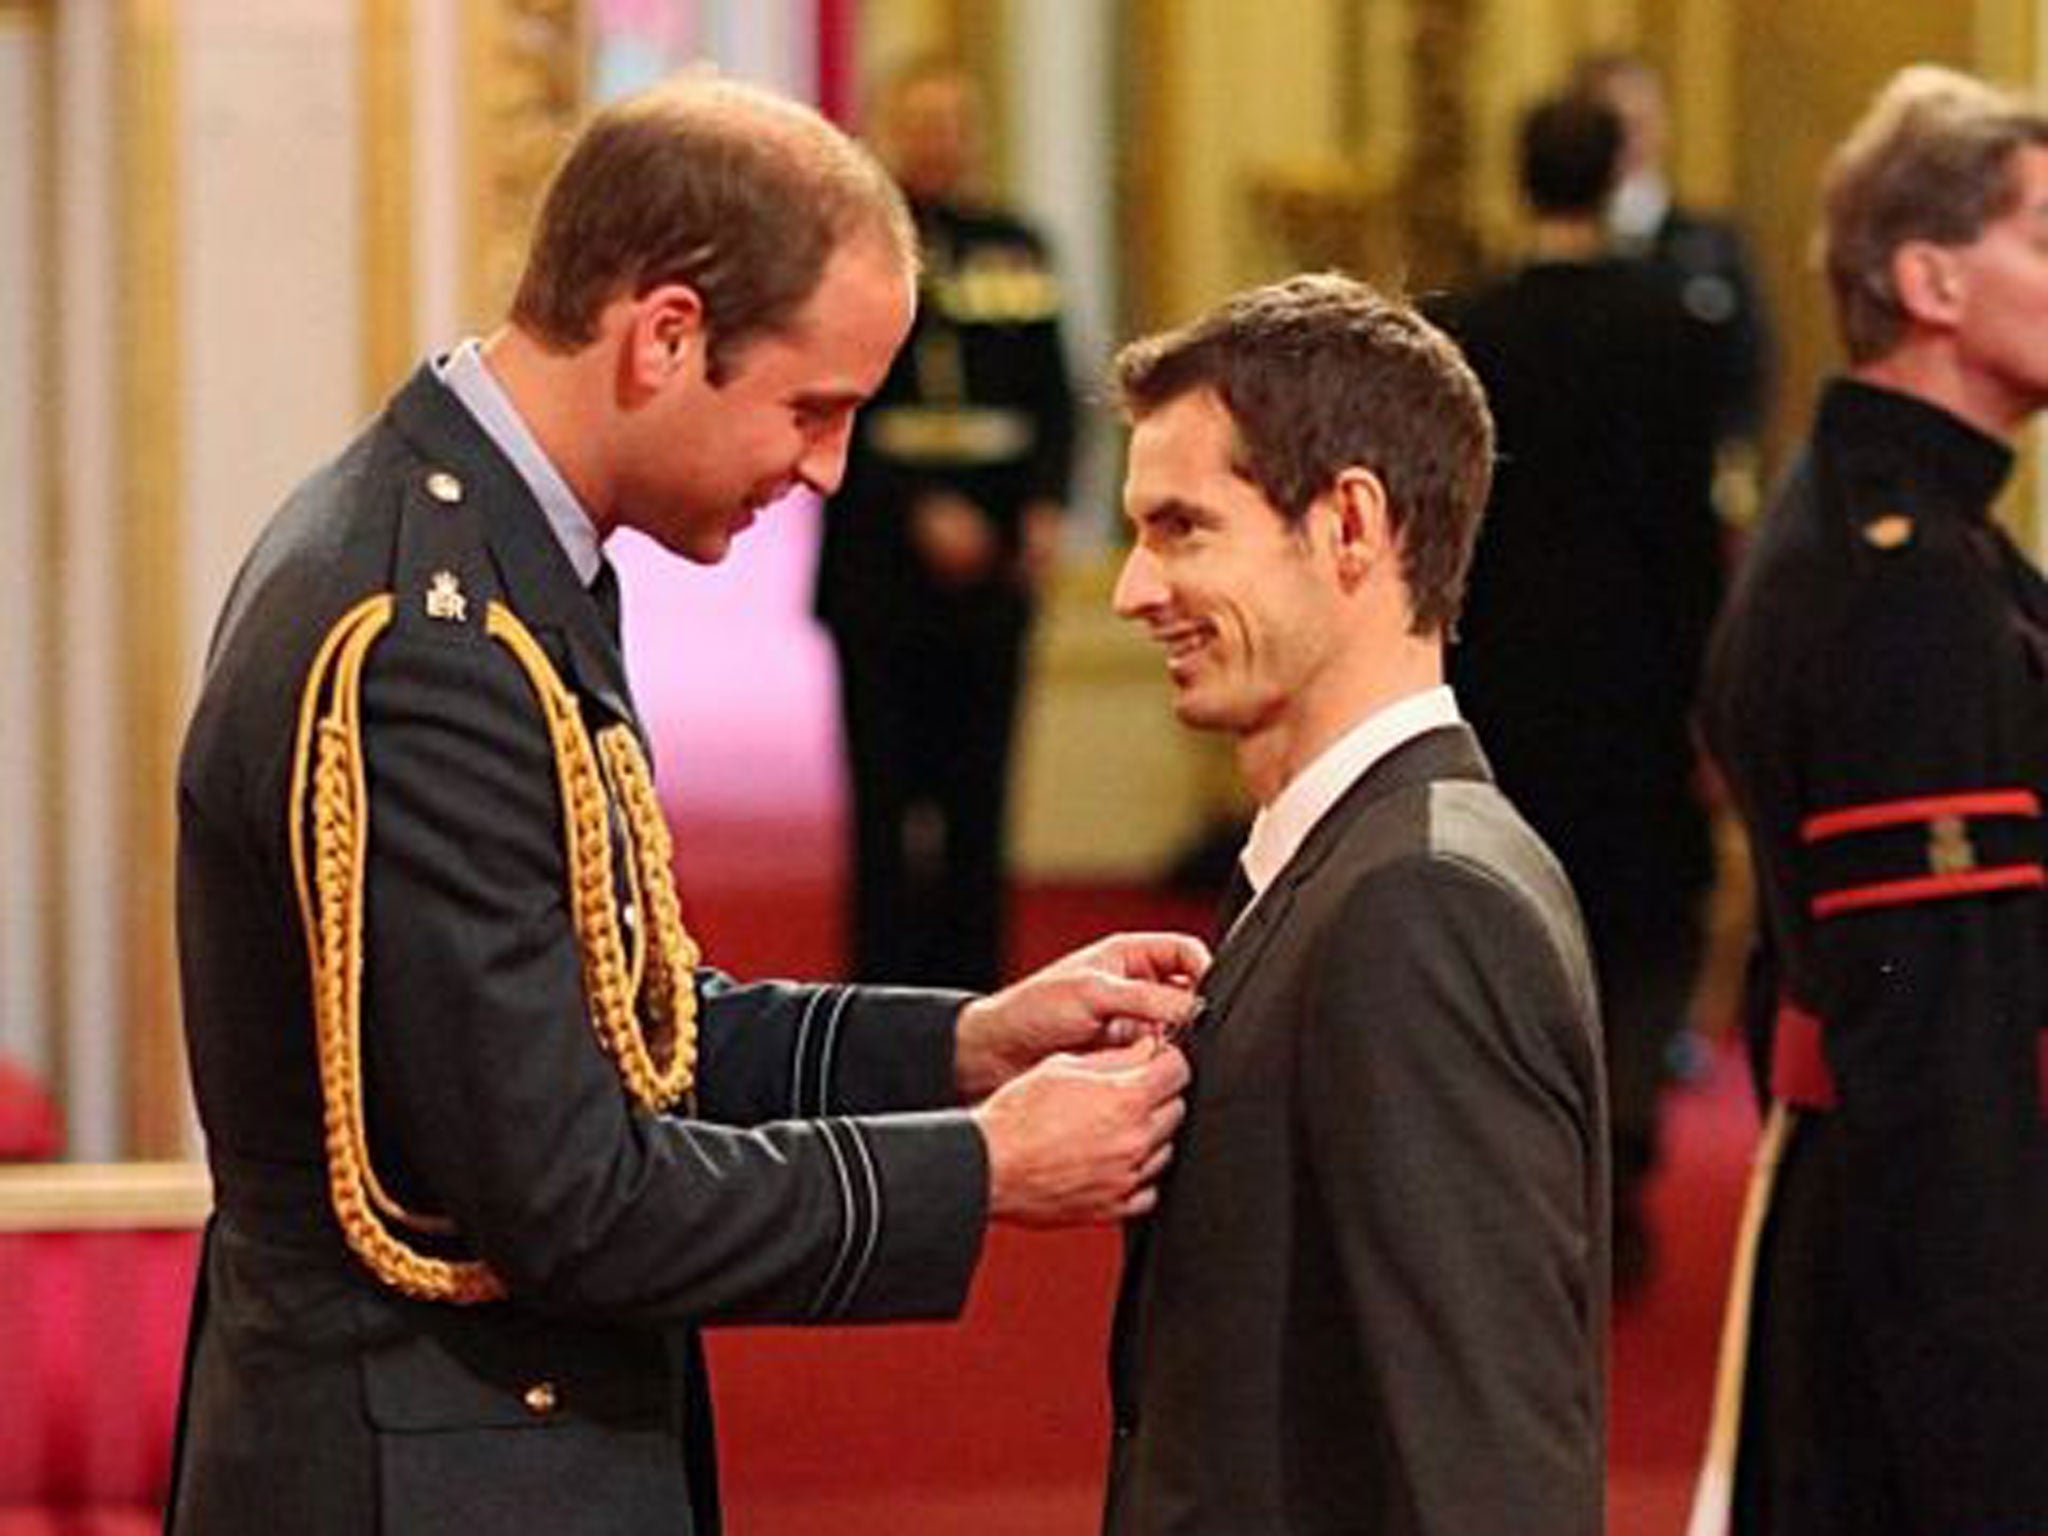 Wimbledon champion Andy Murray receives his OBE medal from Prince William at Buckingham Palace